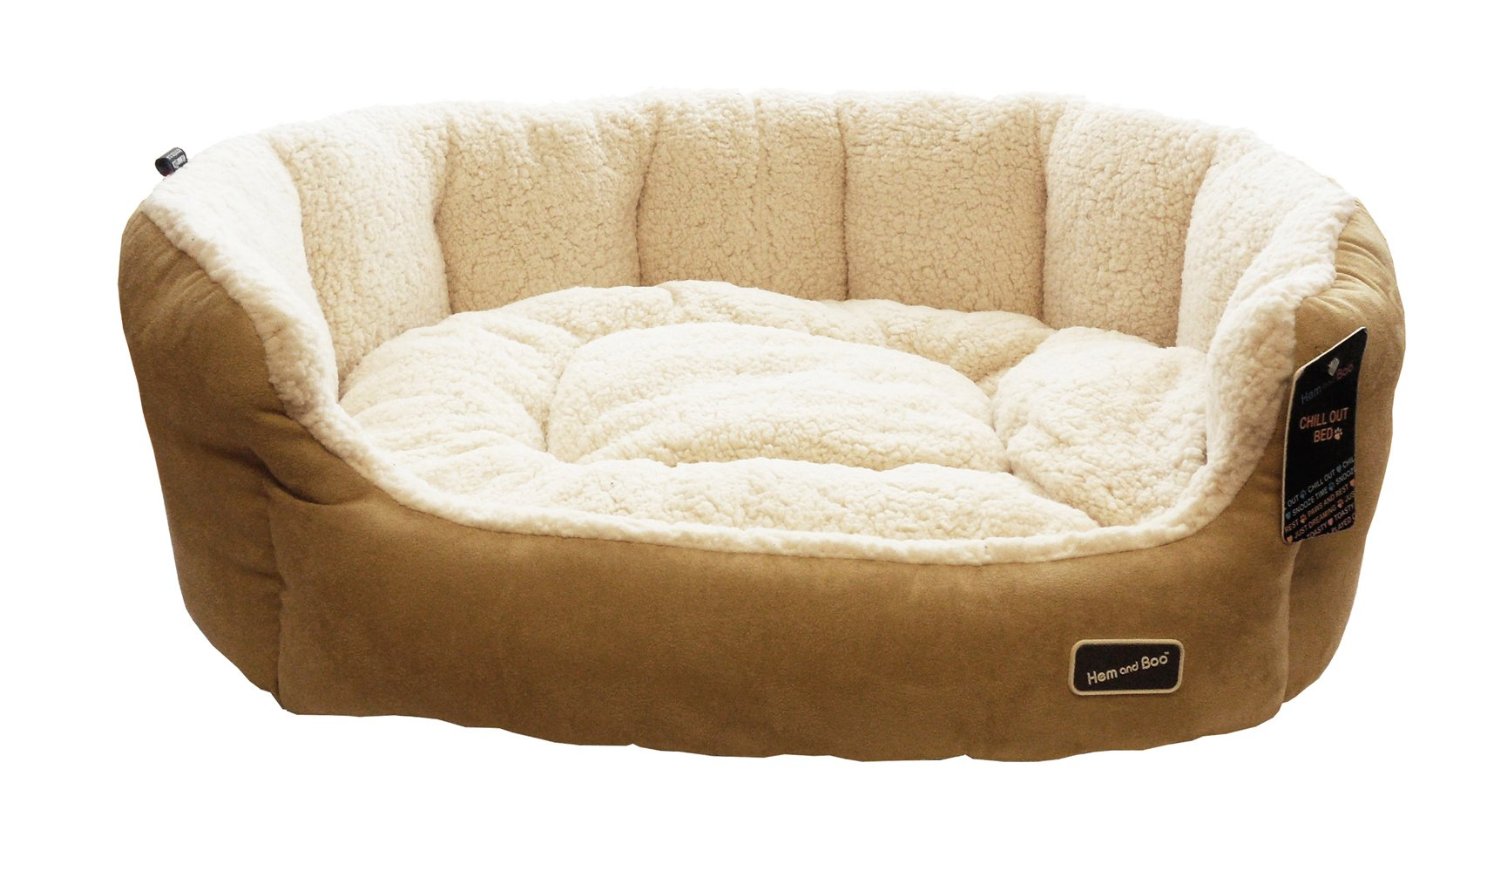 Oval Dog Beds Pictures